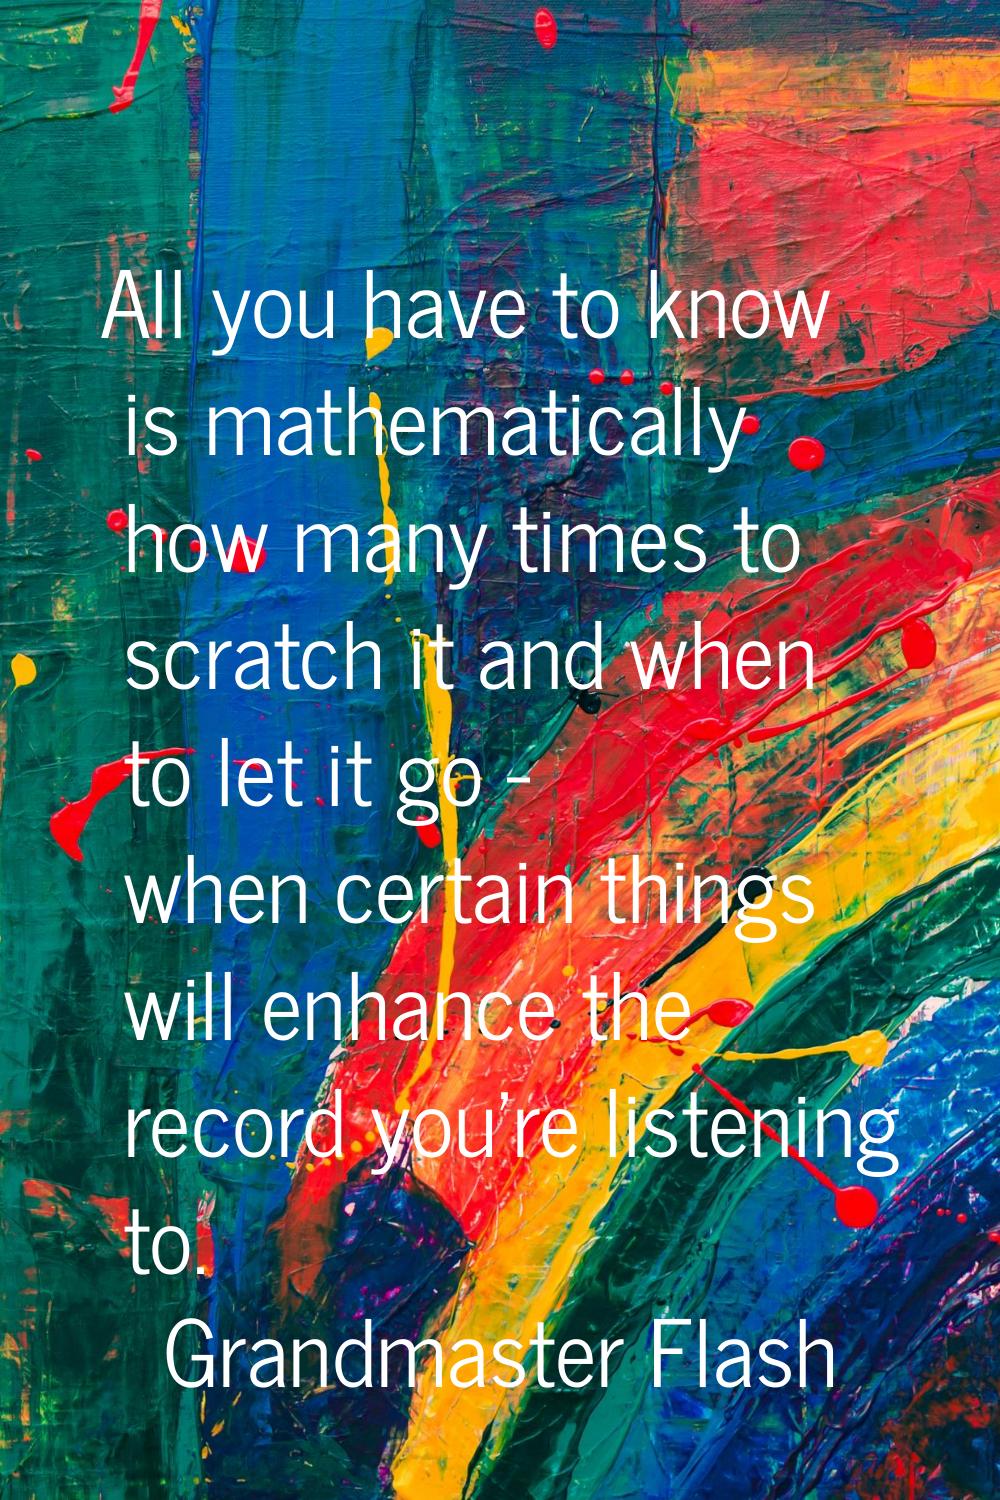 All you have to know is mathematically how many times to scratch it and when to let it go - when ce